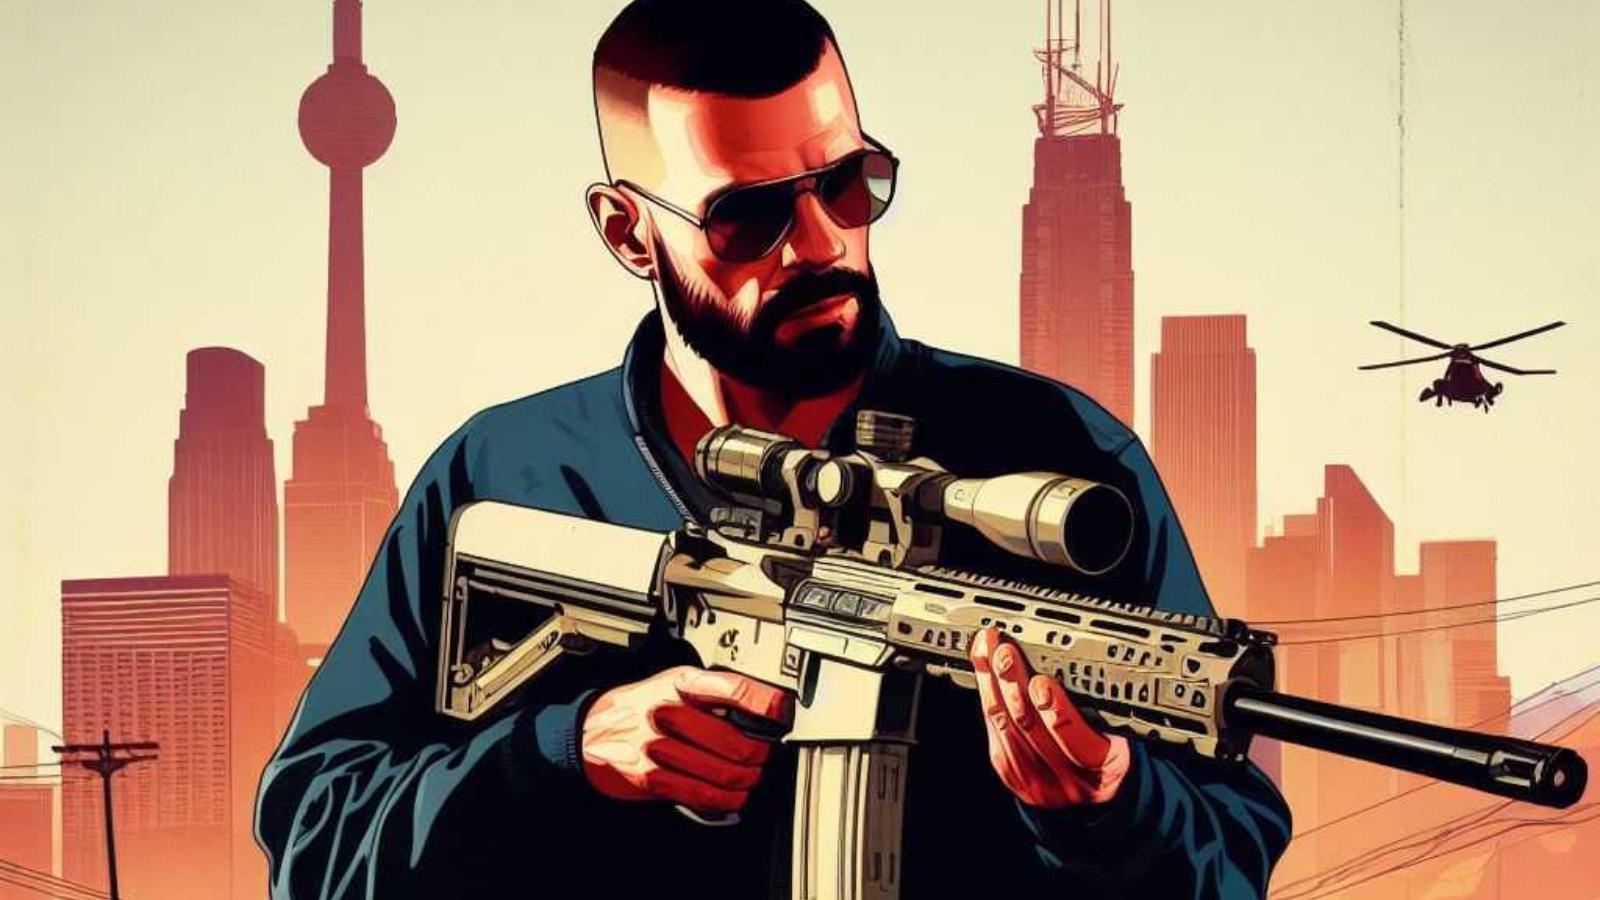 Next GTA Online update release date reportedly revealed by insider